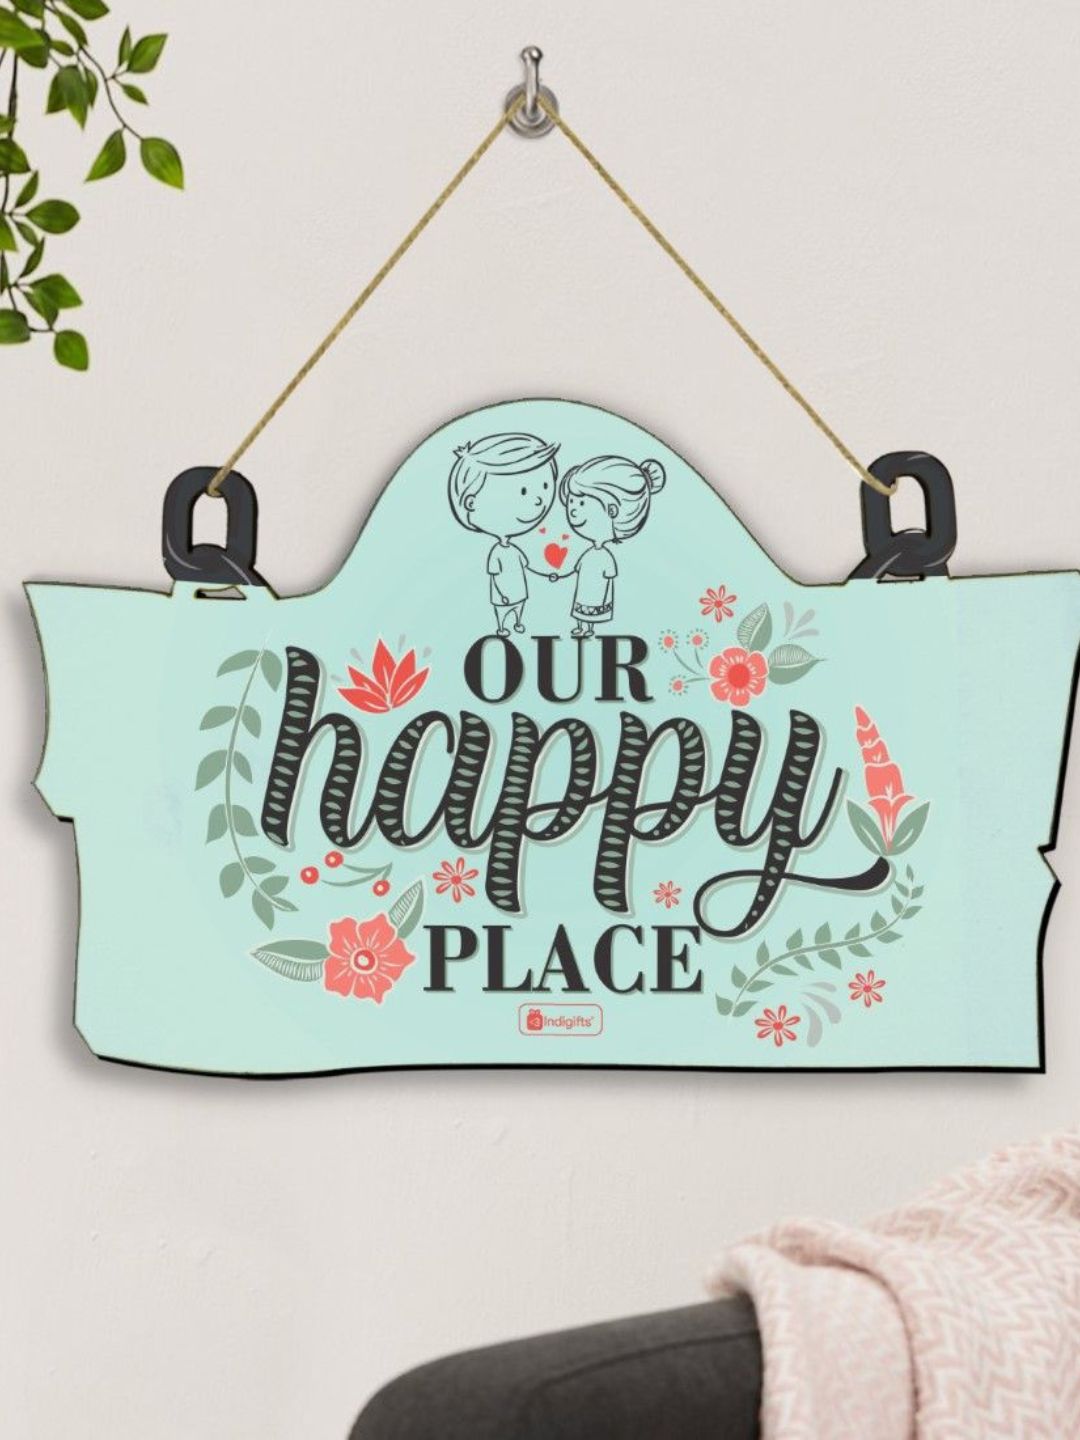 Indigifts Wooden Door Wall Hanging Valentine Gift for Girlfriend Boyfriend Couple You Are My Happy Place 11.05×7 Inch – Gift for Boyfriend, Gift for Girlfriend, Gift For Lover, Gifts For Couple